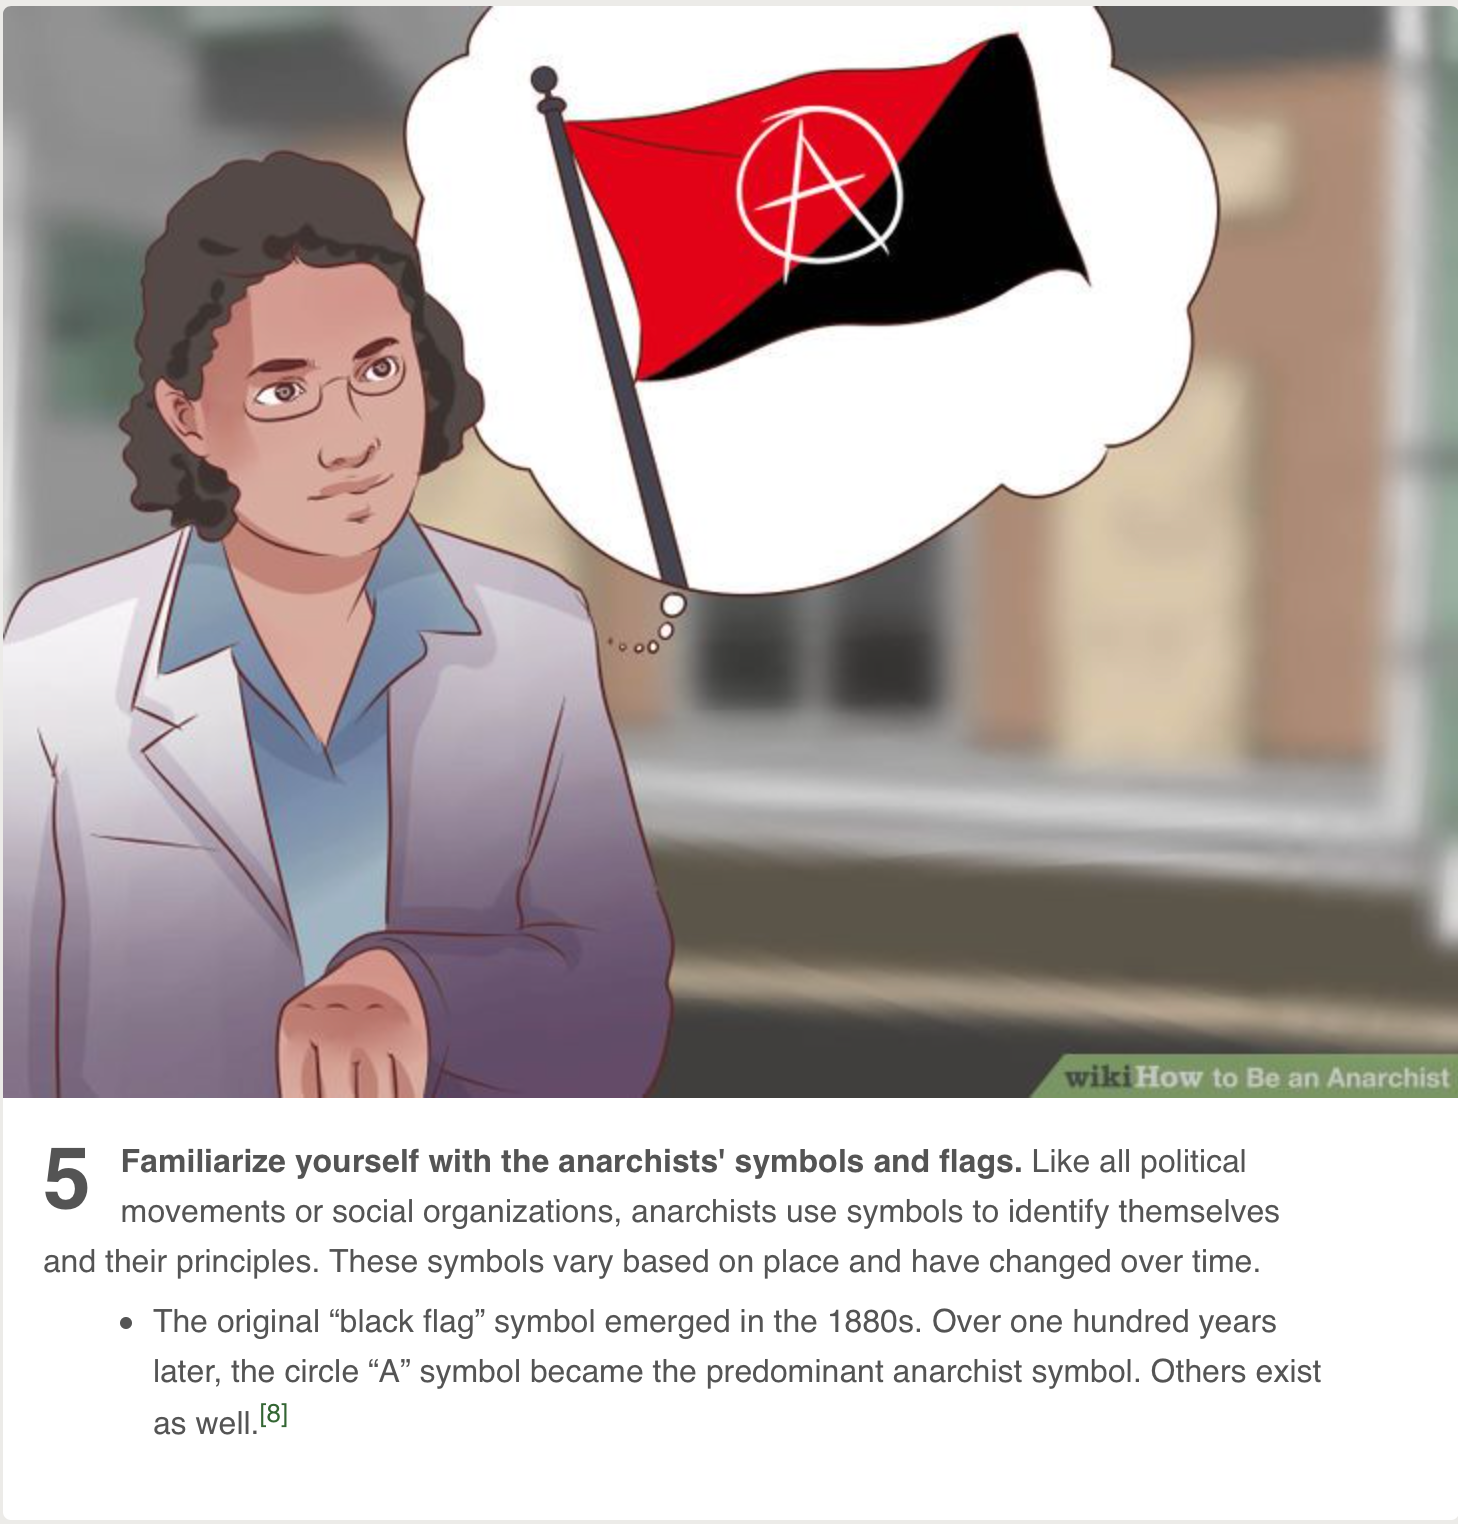 Anarchist Symbols and Flags Education